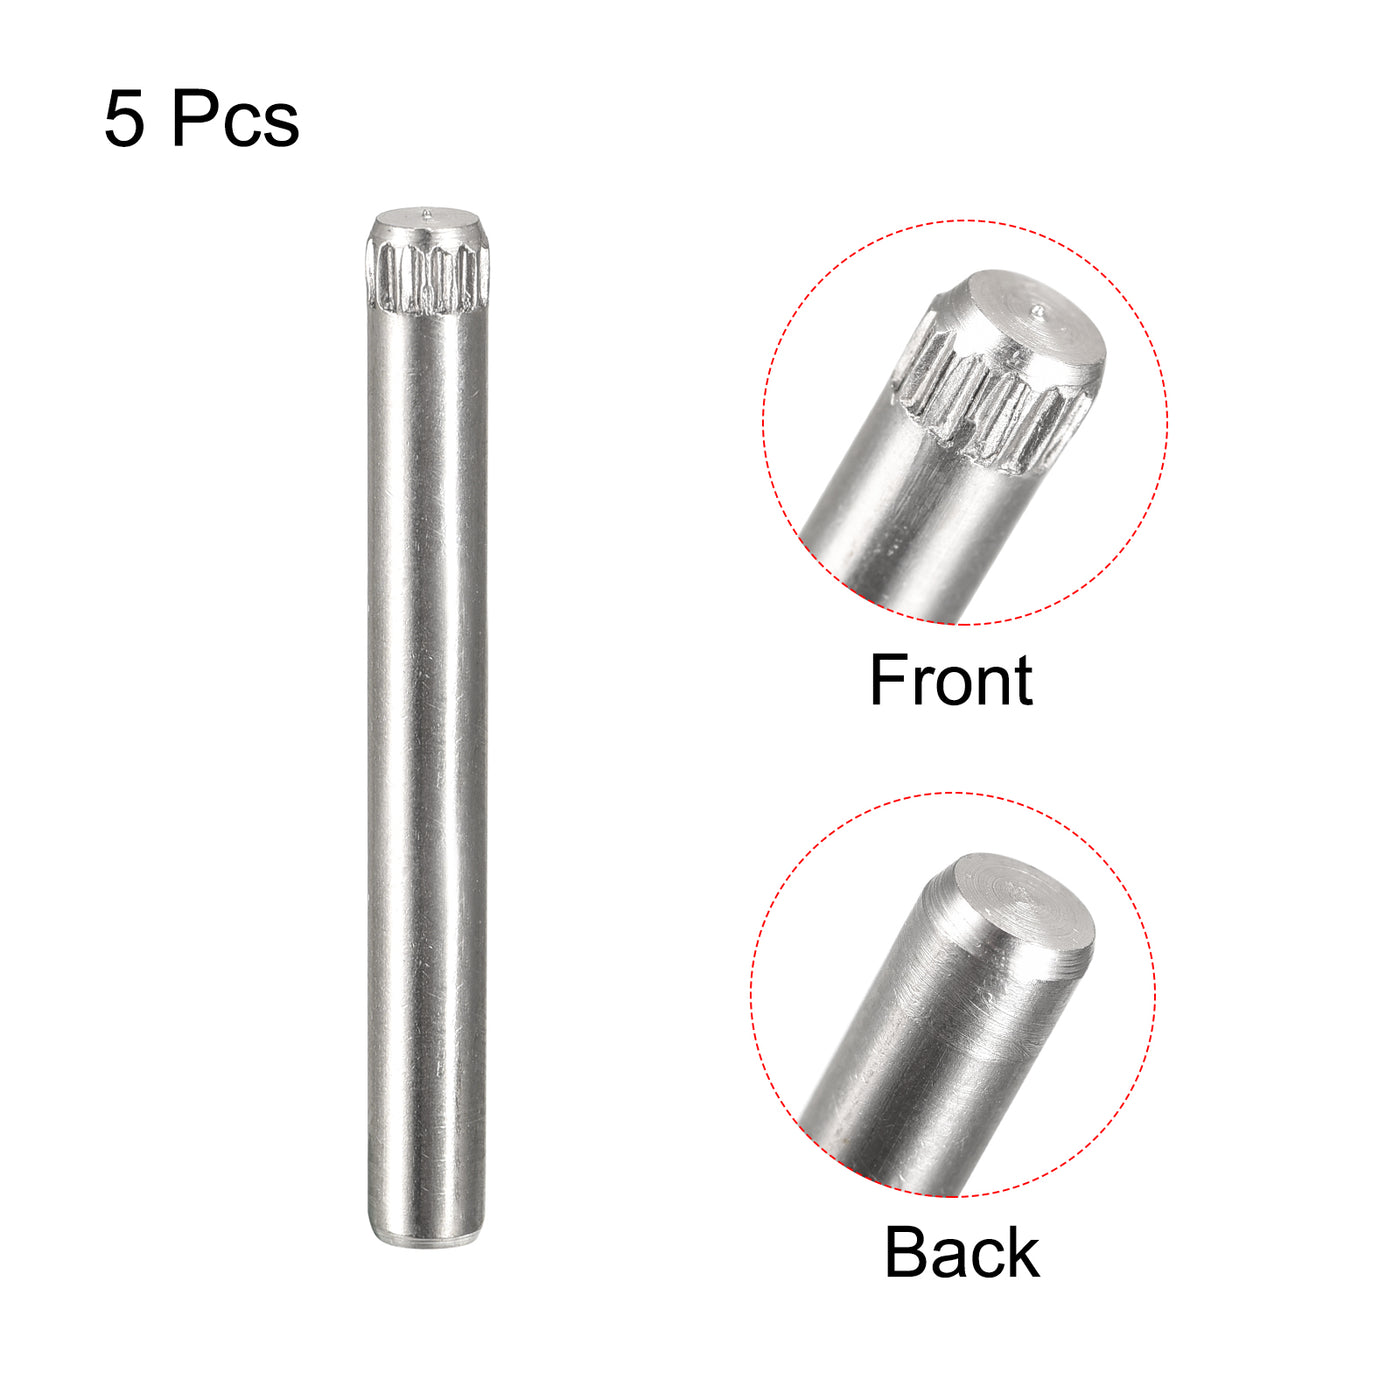 uxcell Uxcell 4x40mm 304 Stainless Steel Dowel Pins, 5Pcs Knurled Head Flat End Dowel Pin